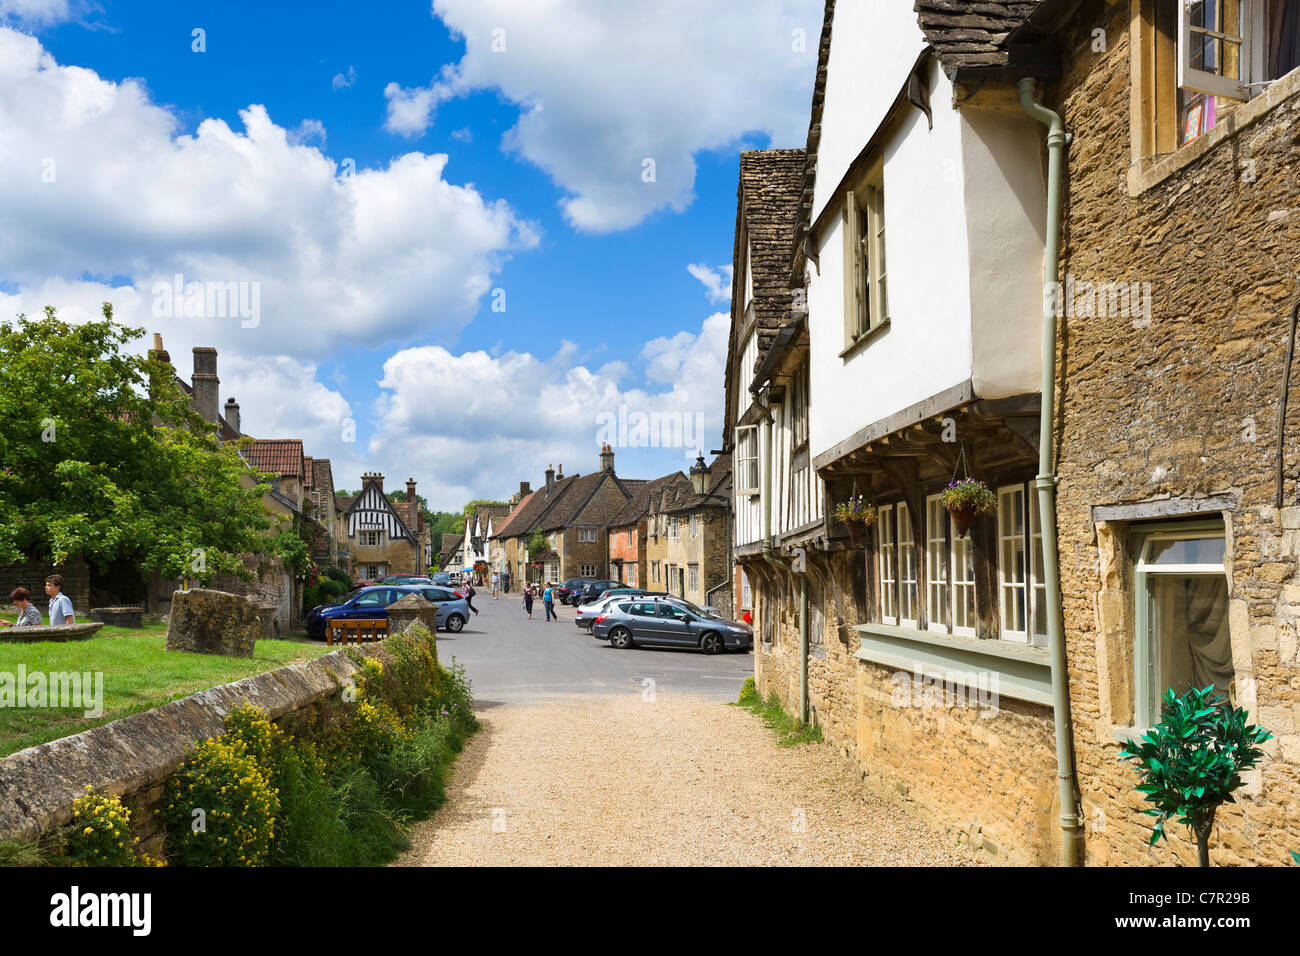 Church Street in the centre of the picturesque village of Lacock, near Chippenham, Wiltshire, England, UK Stock Photo